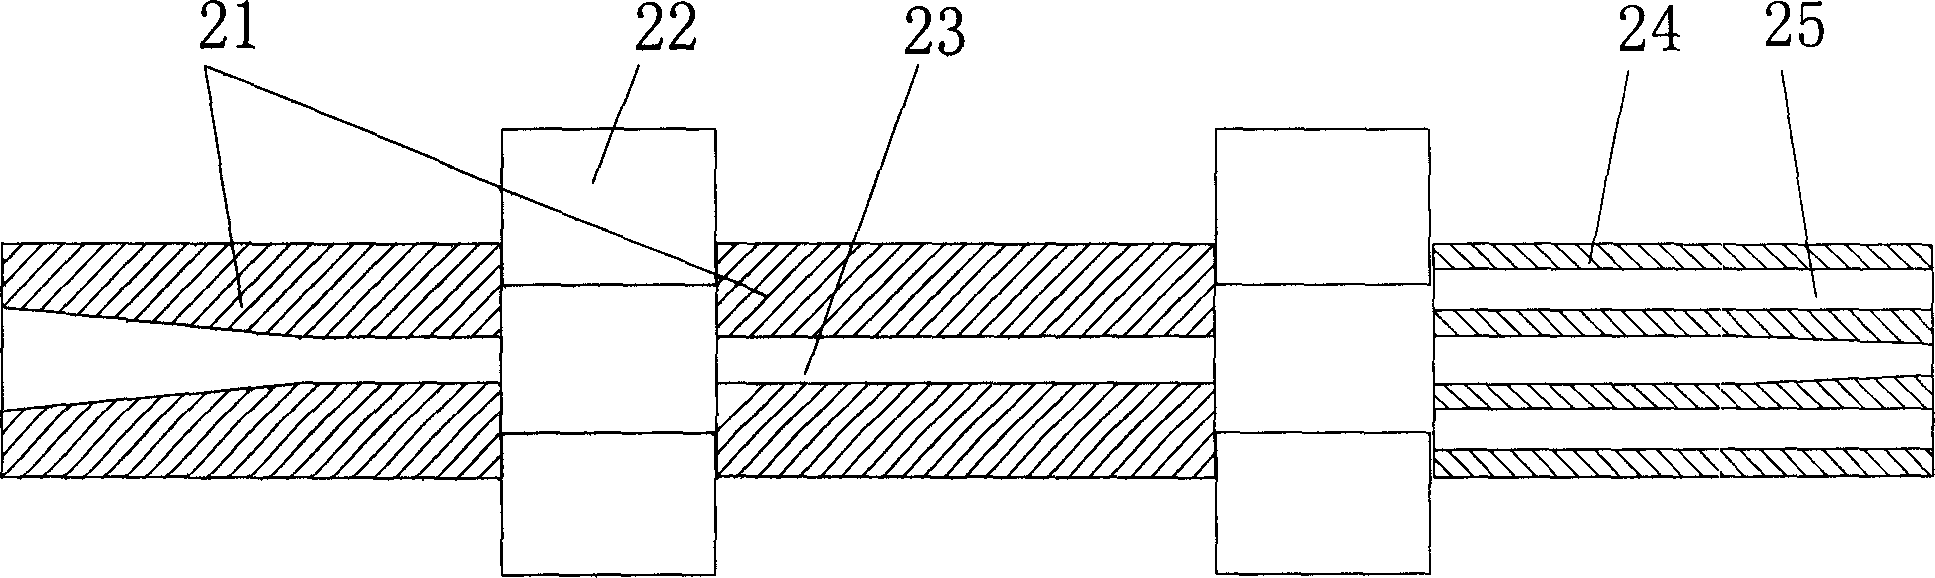 Pultrusion method for thermoplastic composite material and forming die thereof